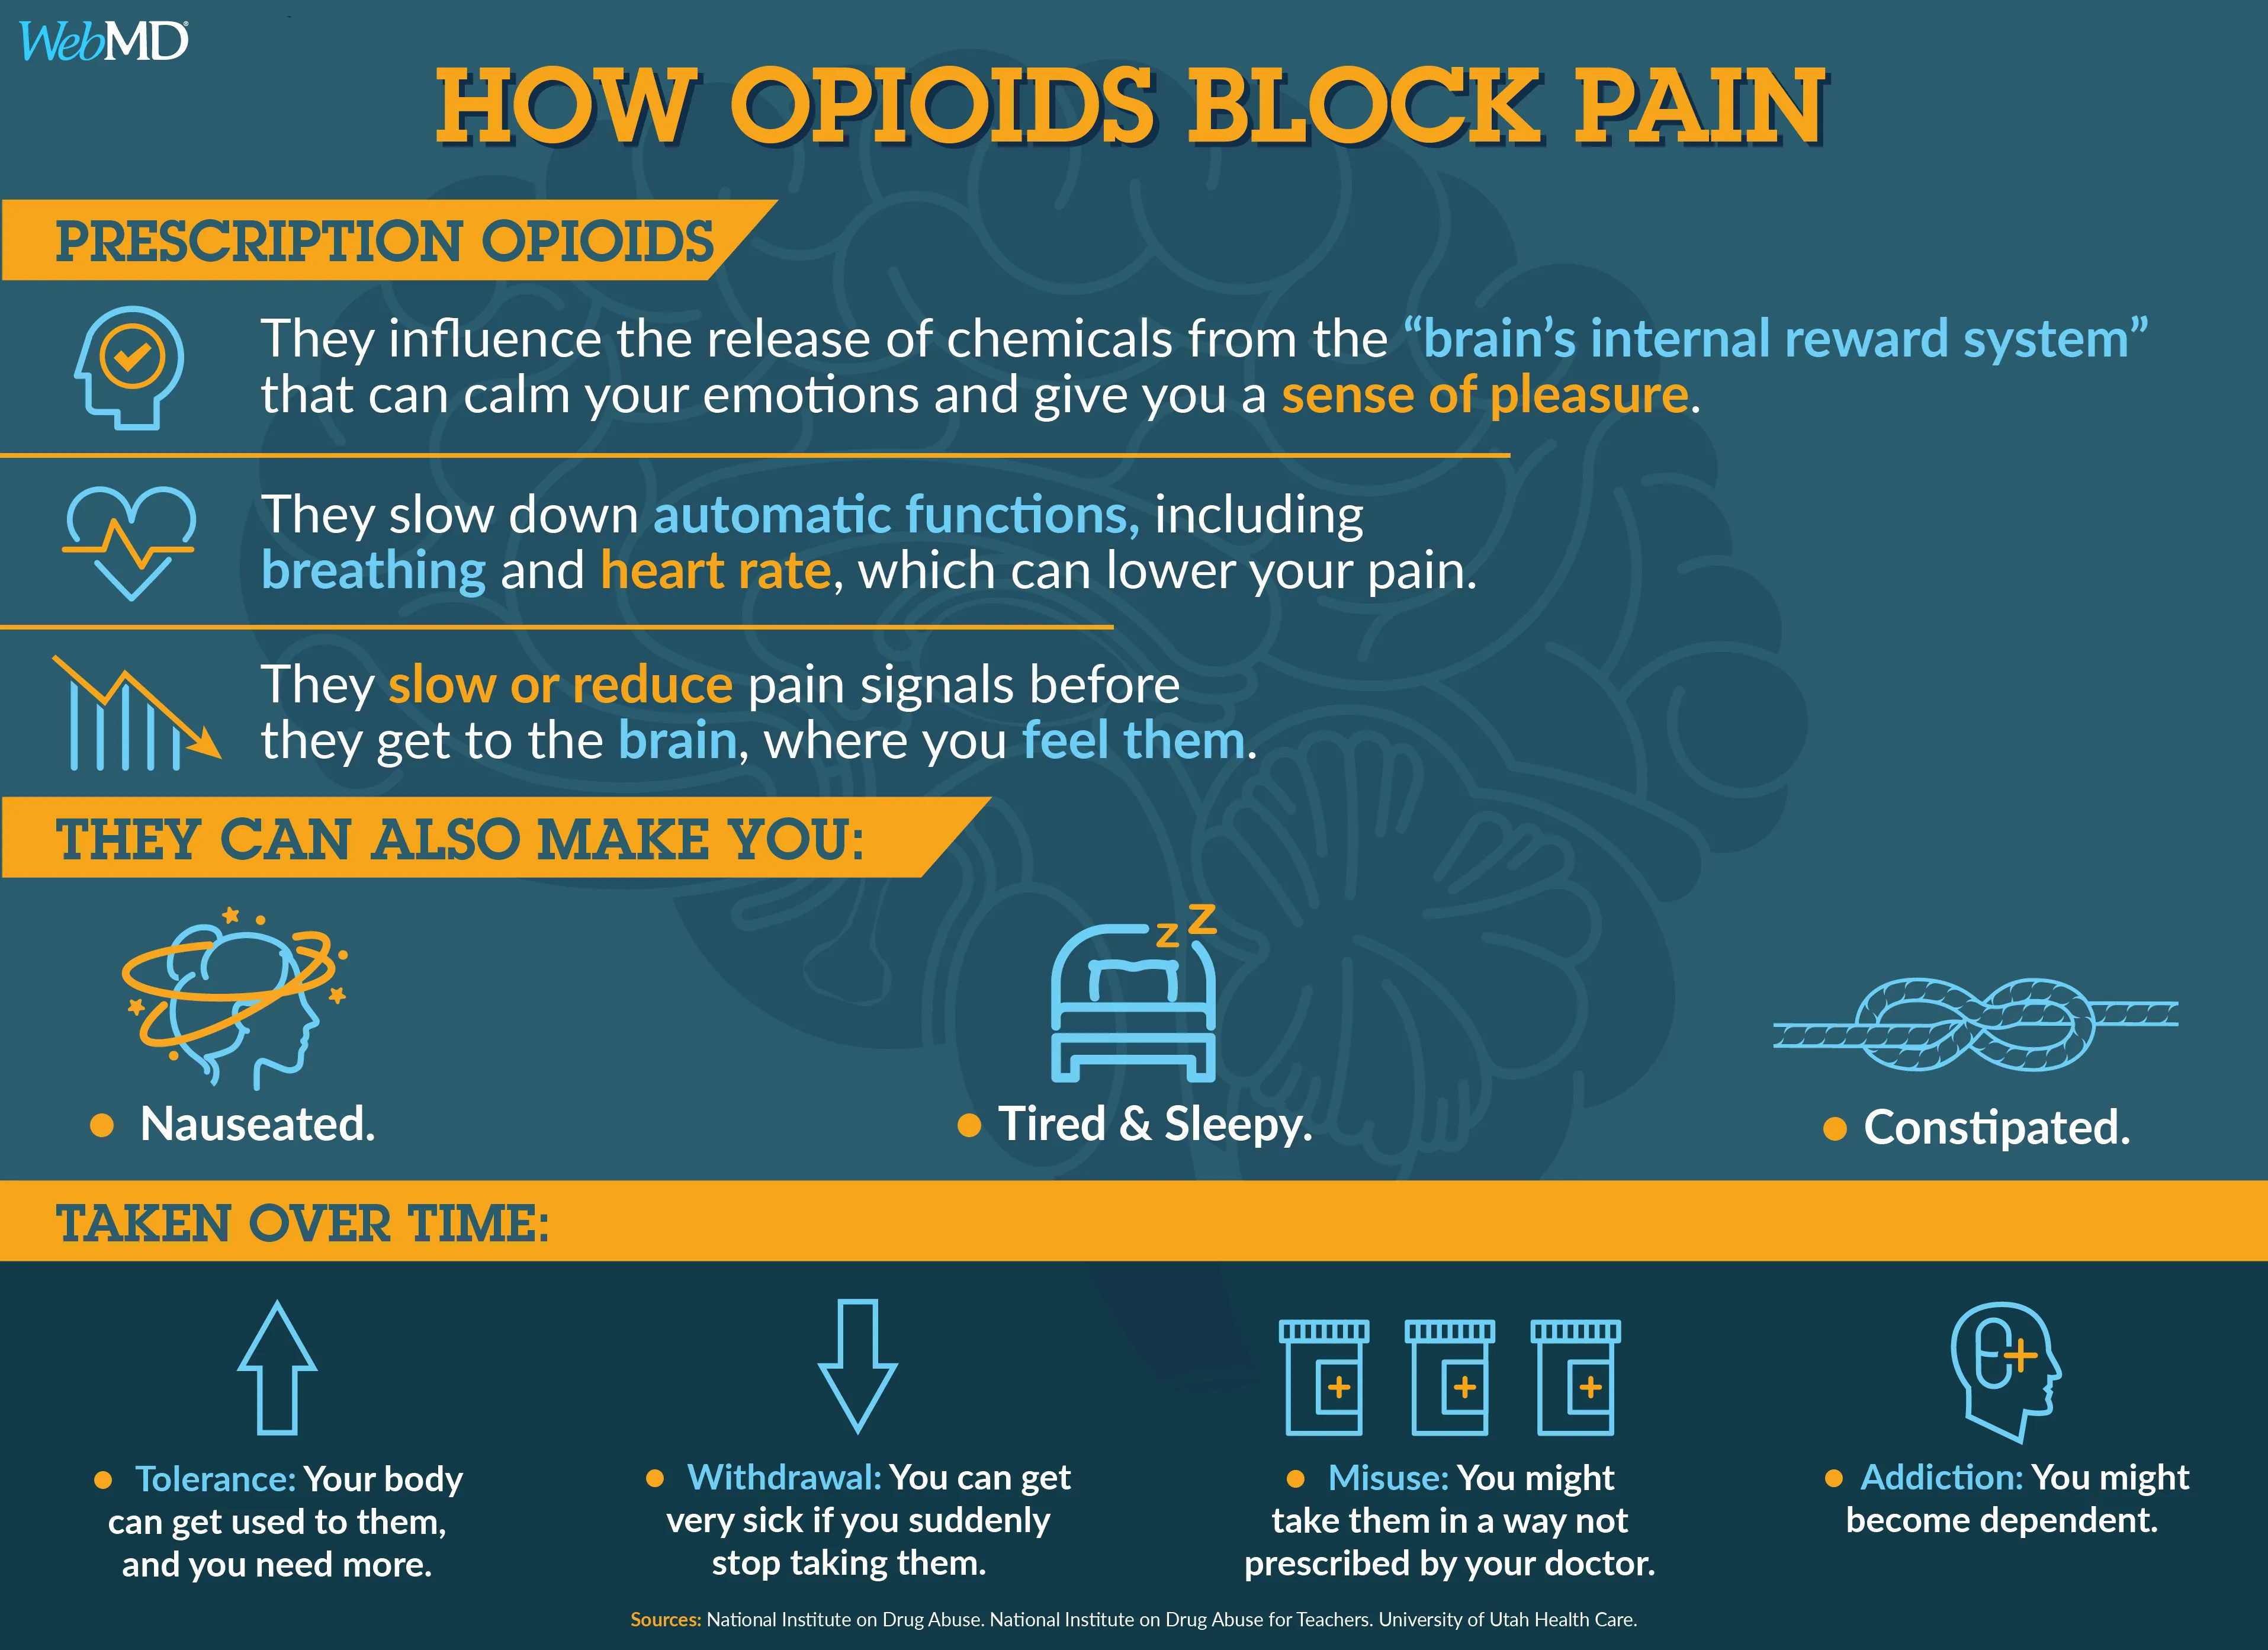 Beyond Opioids: The Future of Pain Management